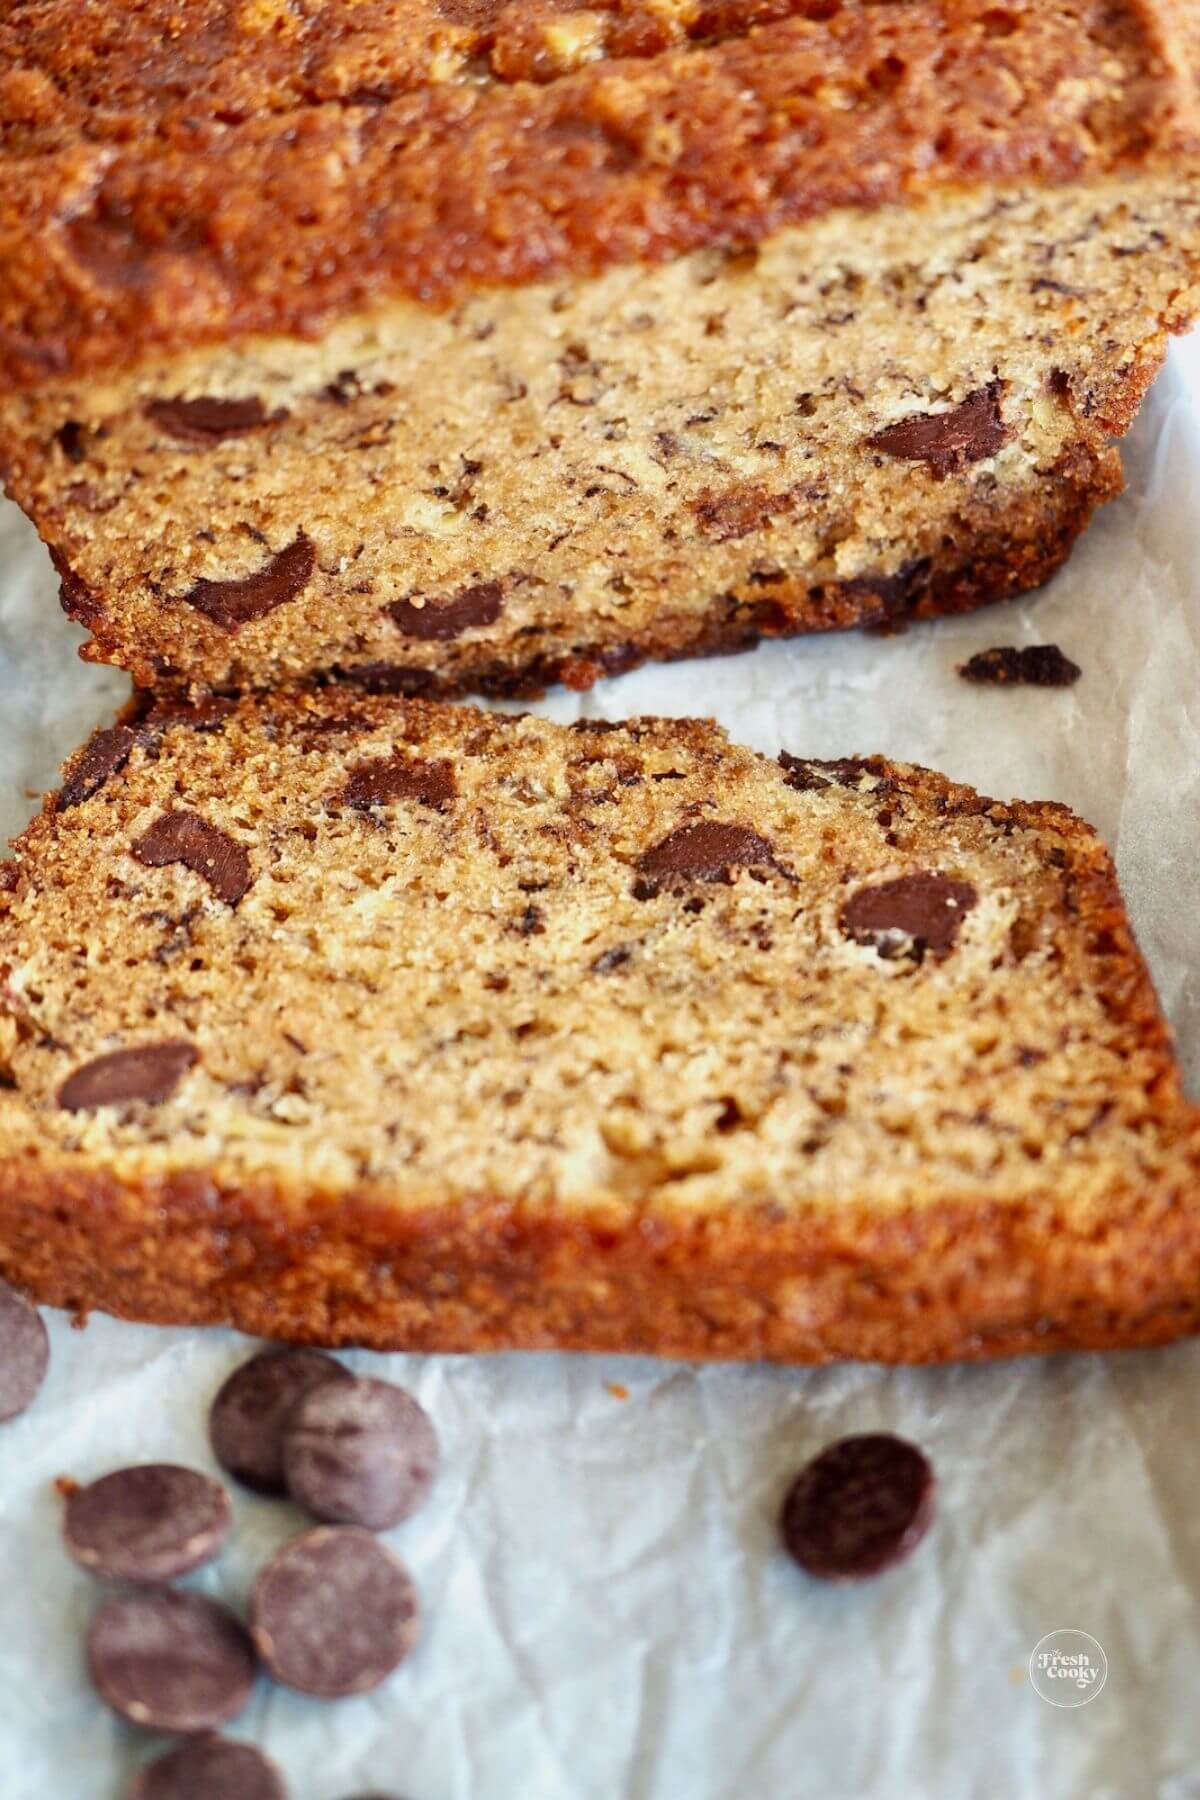 Banana bread with chocolate chips in it.